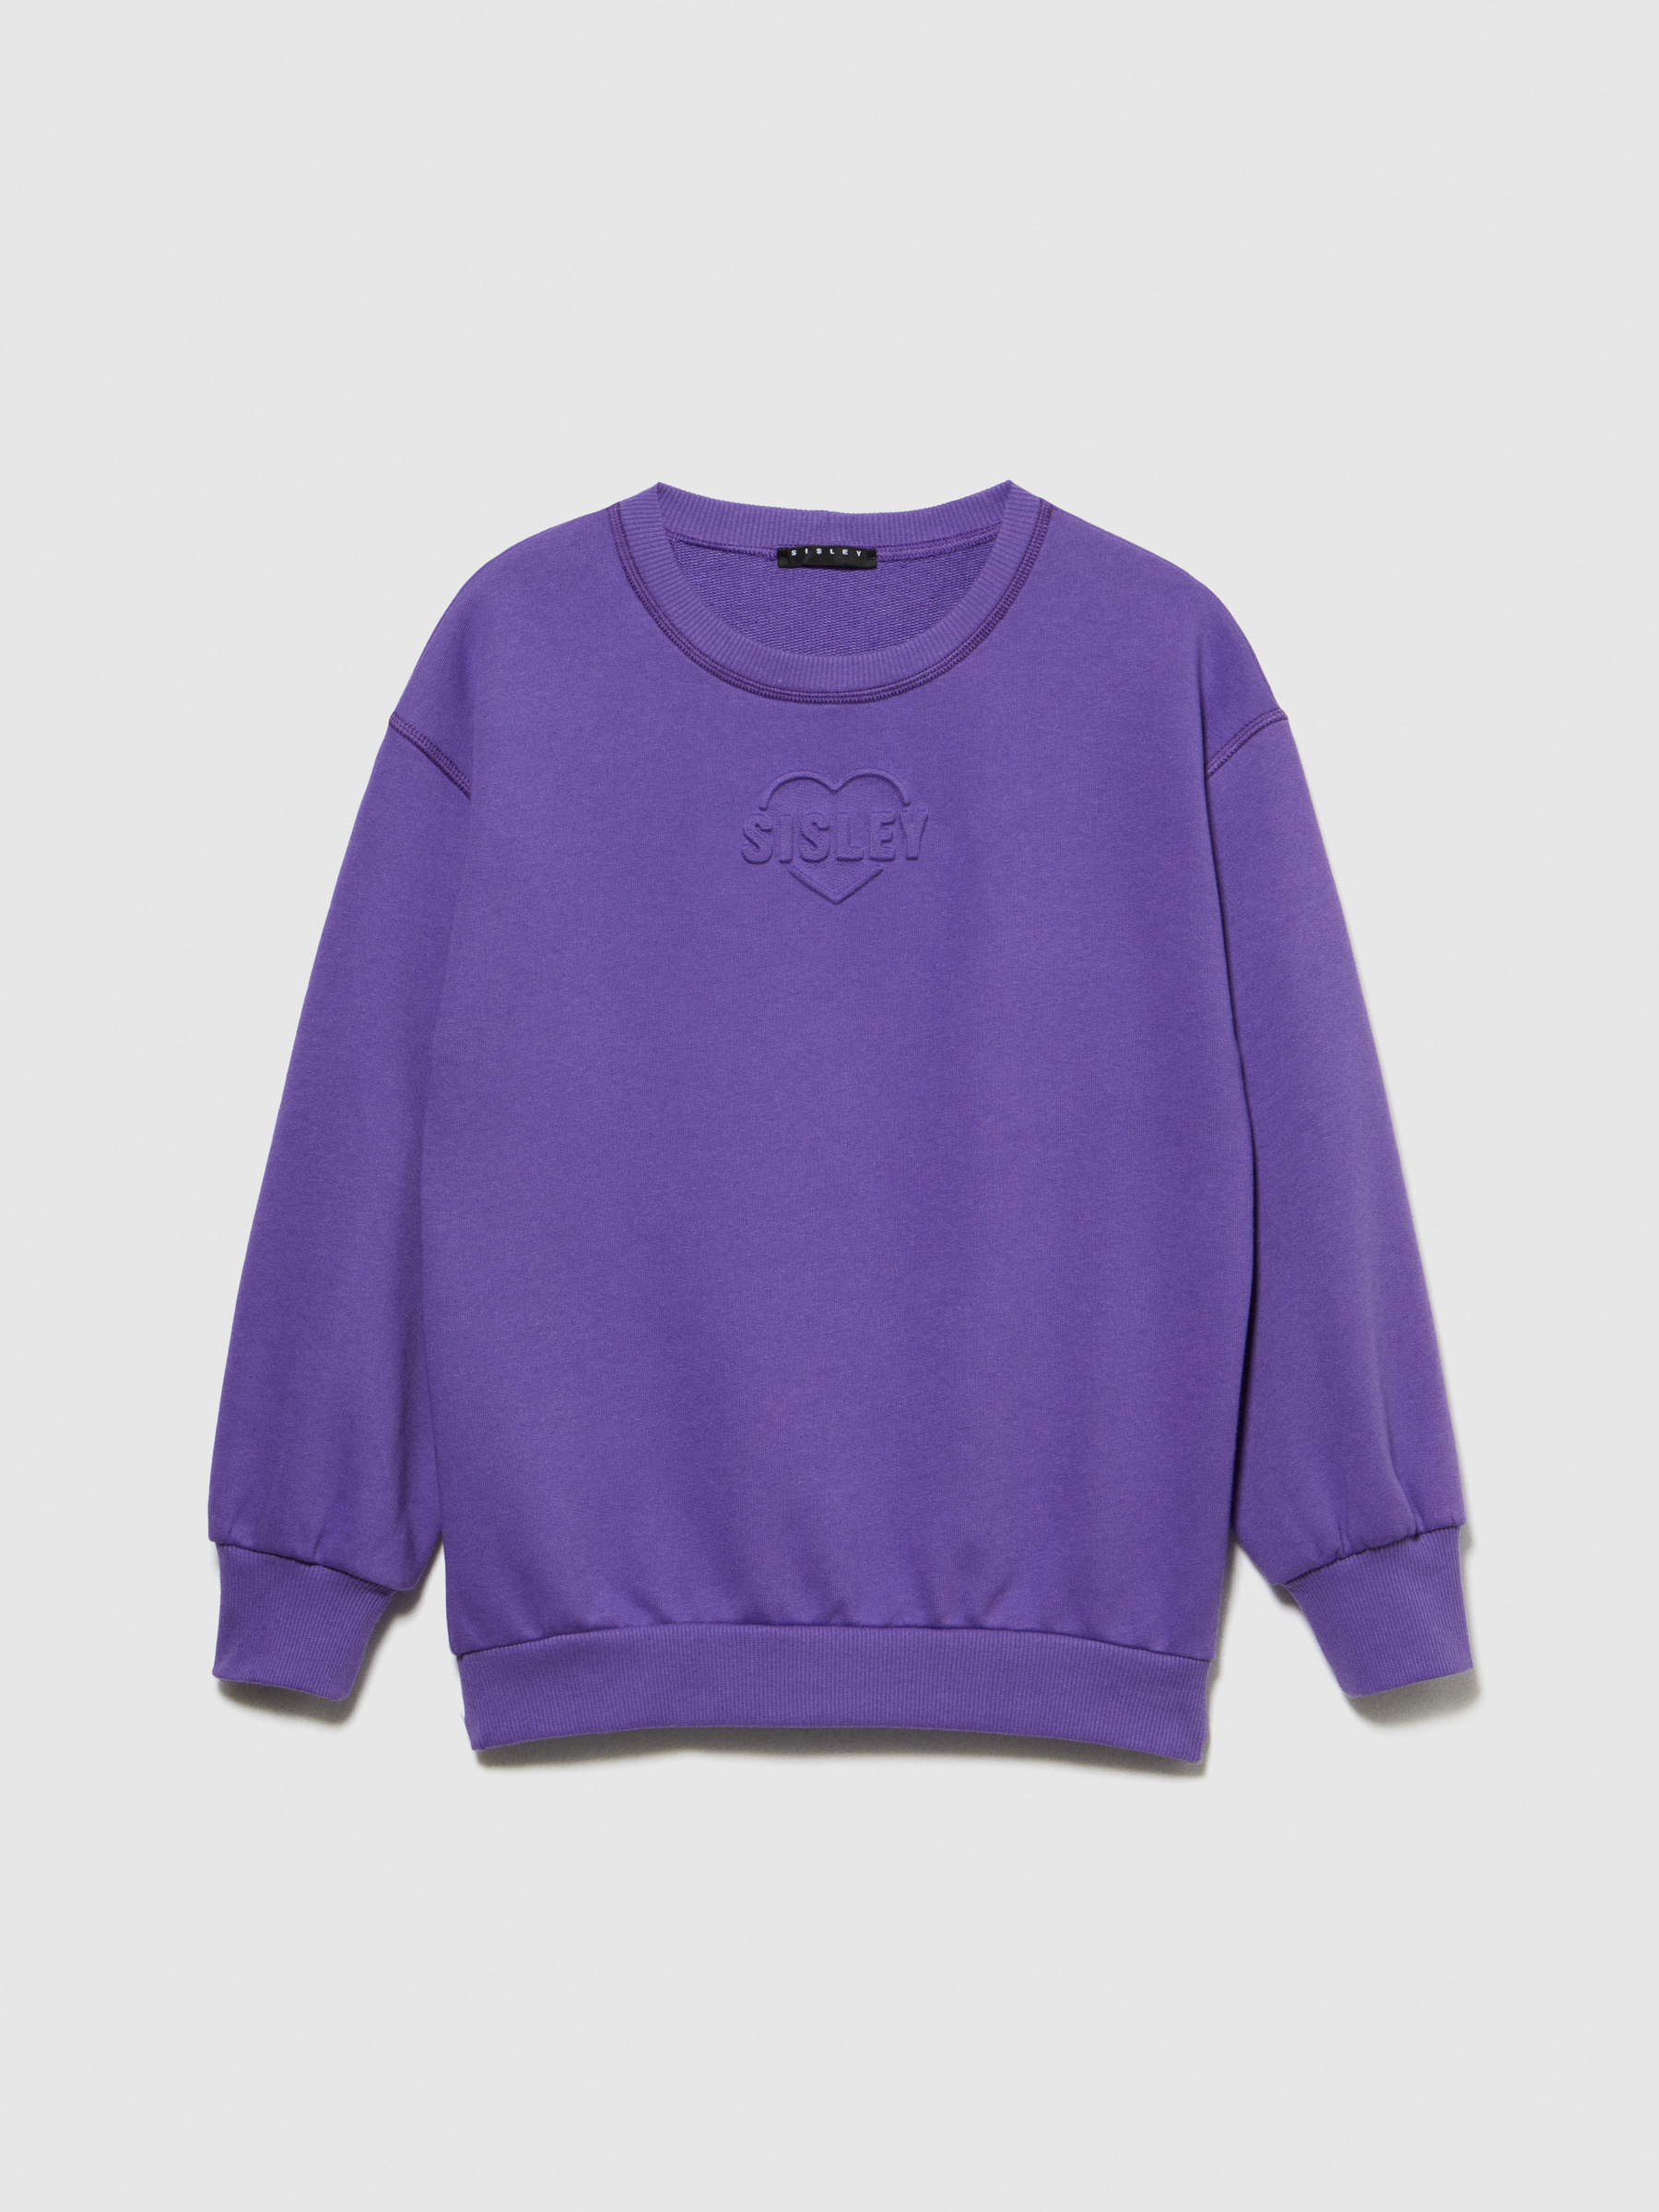 Sisley Young - Sweatshirt With Embossed Print, Woman, Violet, Size: M